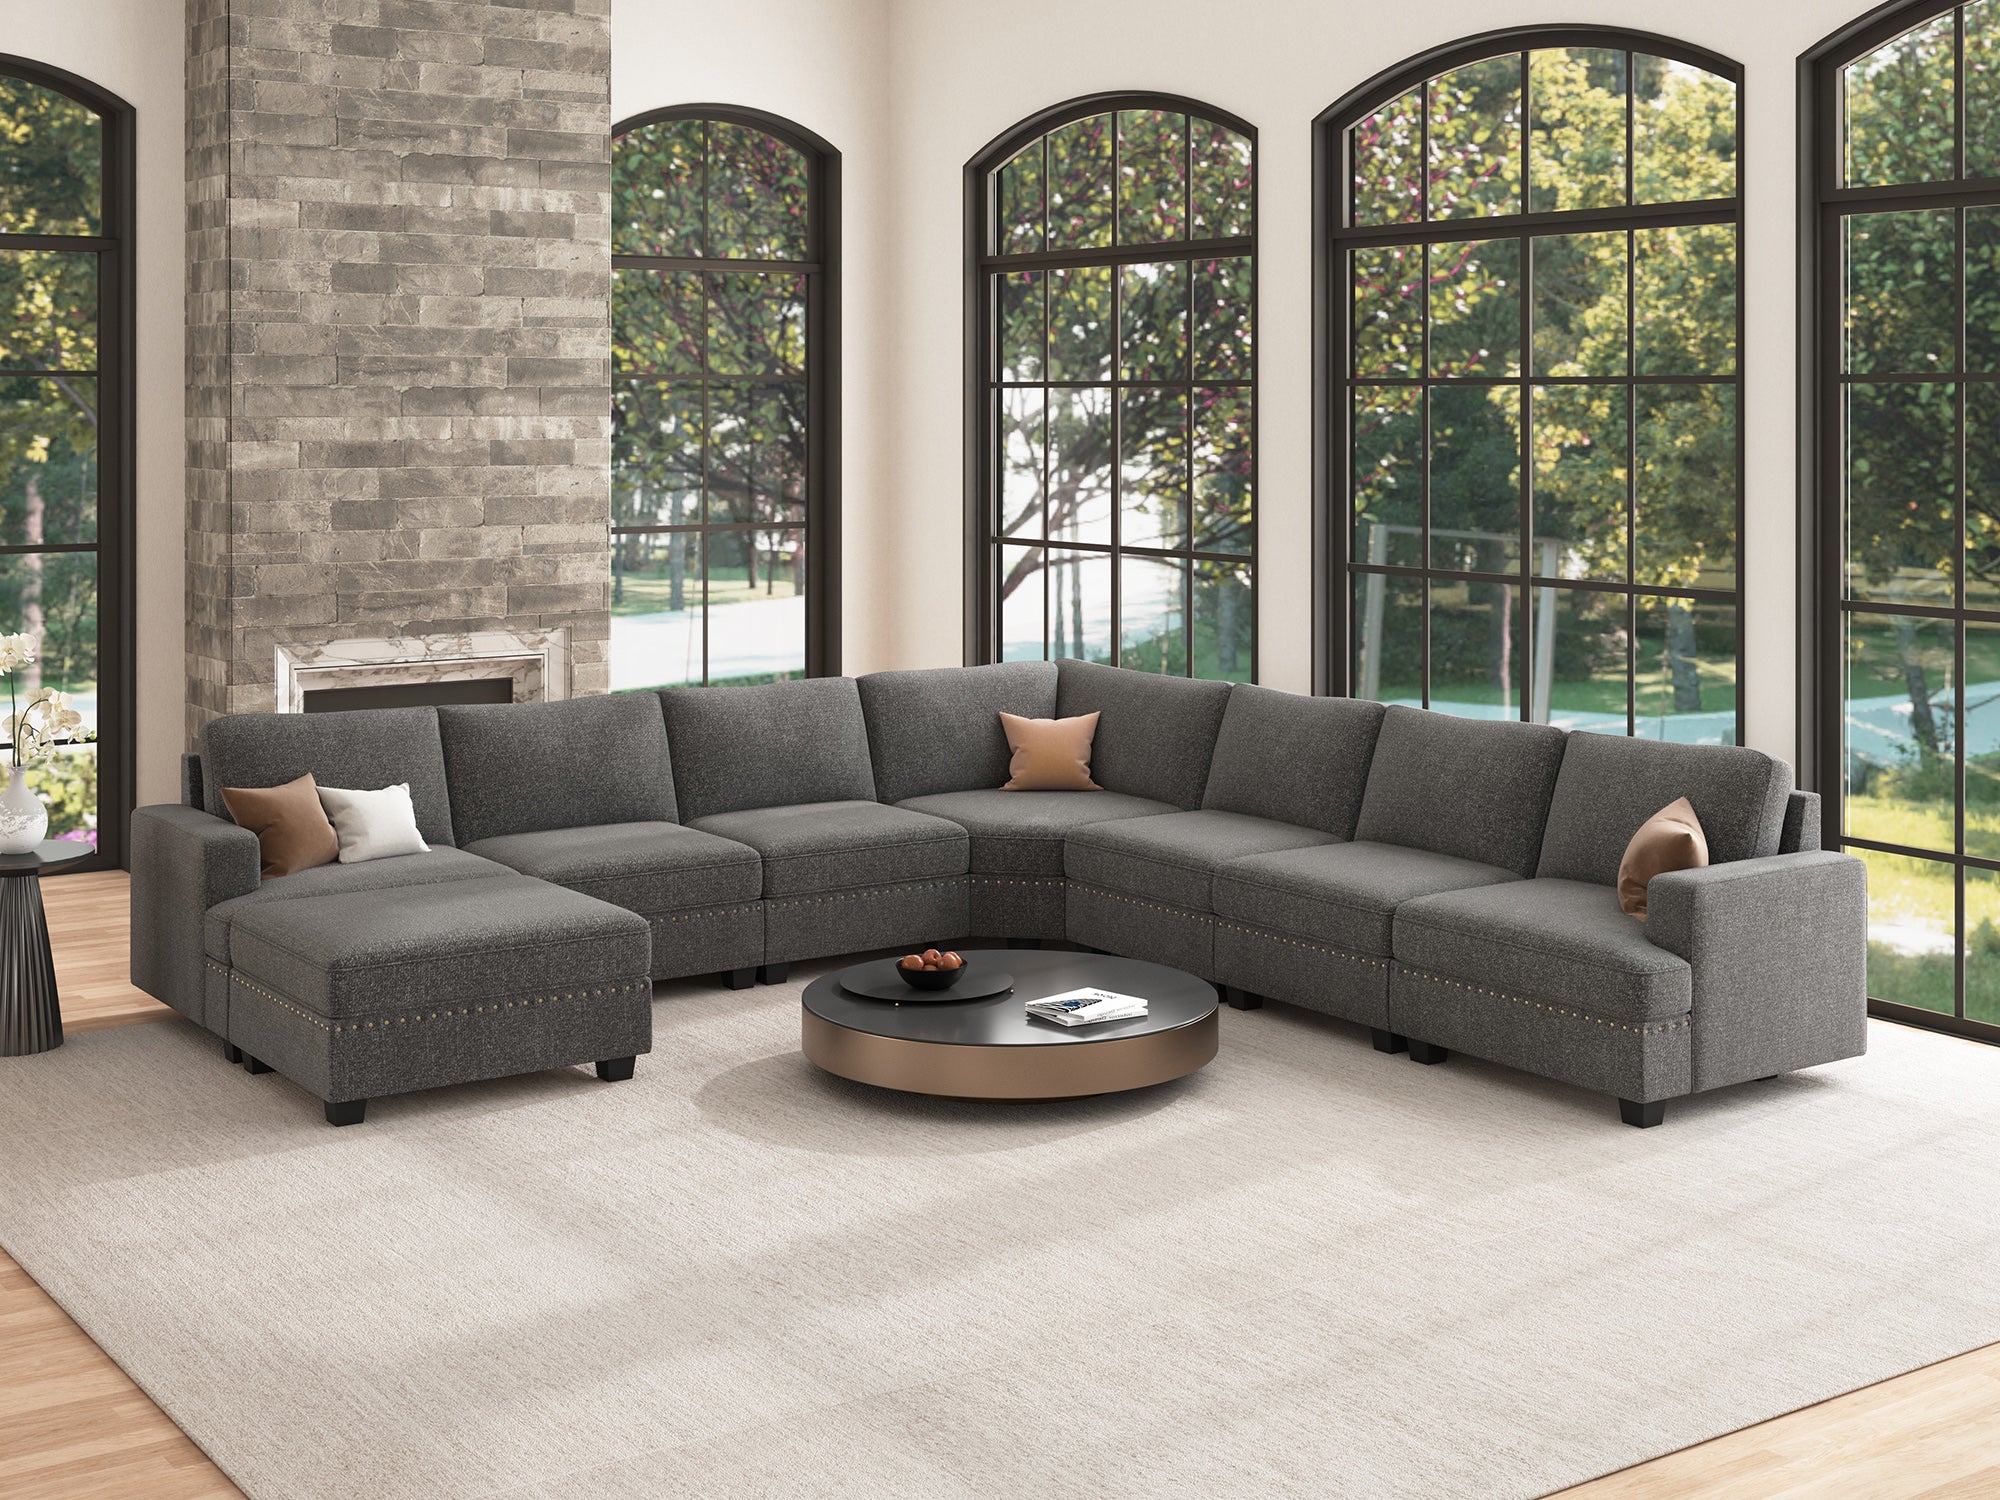 HONBAY 7-Seat Corner Modular Sofa Oversized Sectional Sofa Couch with Storage Ottoman #Color_Light Grey